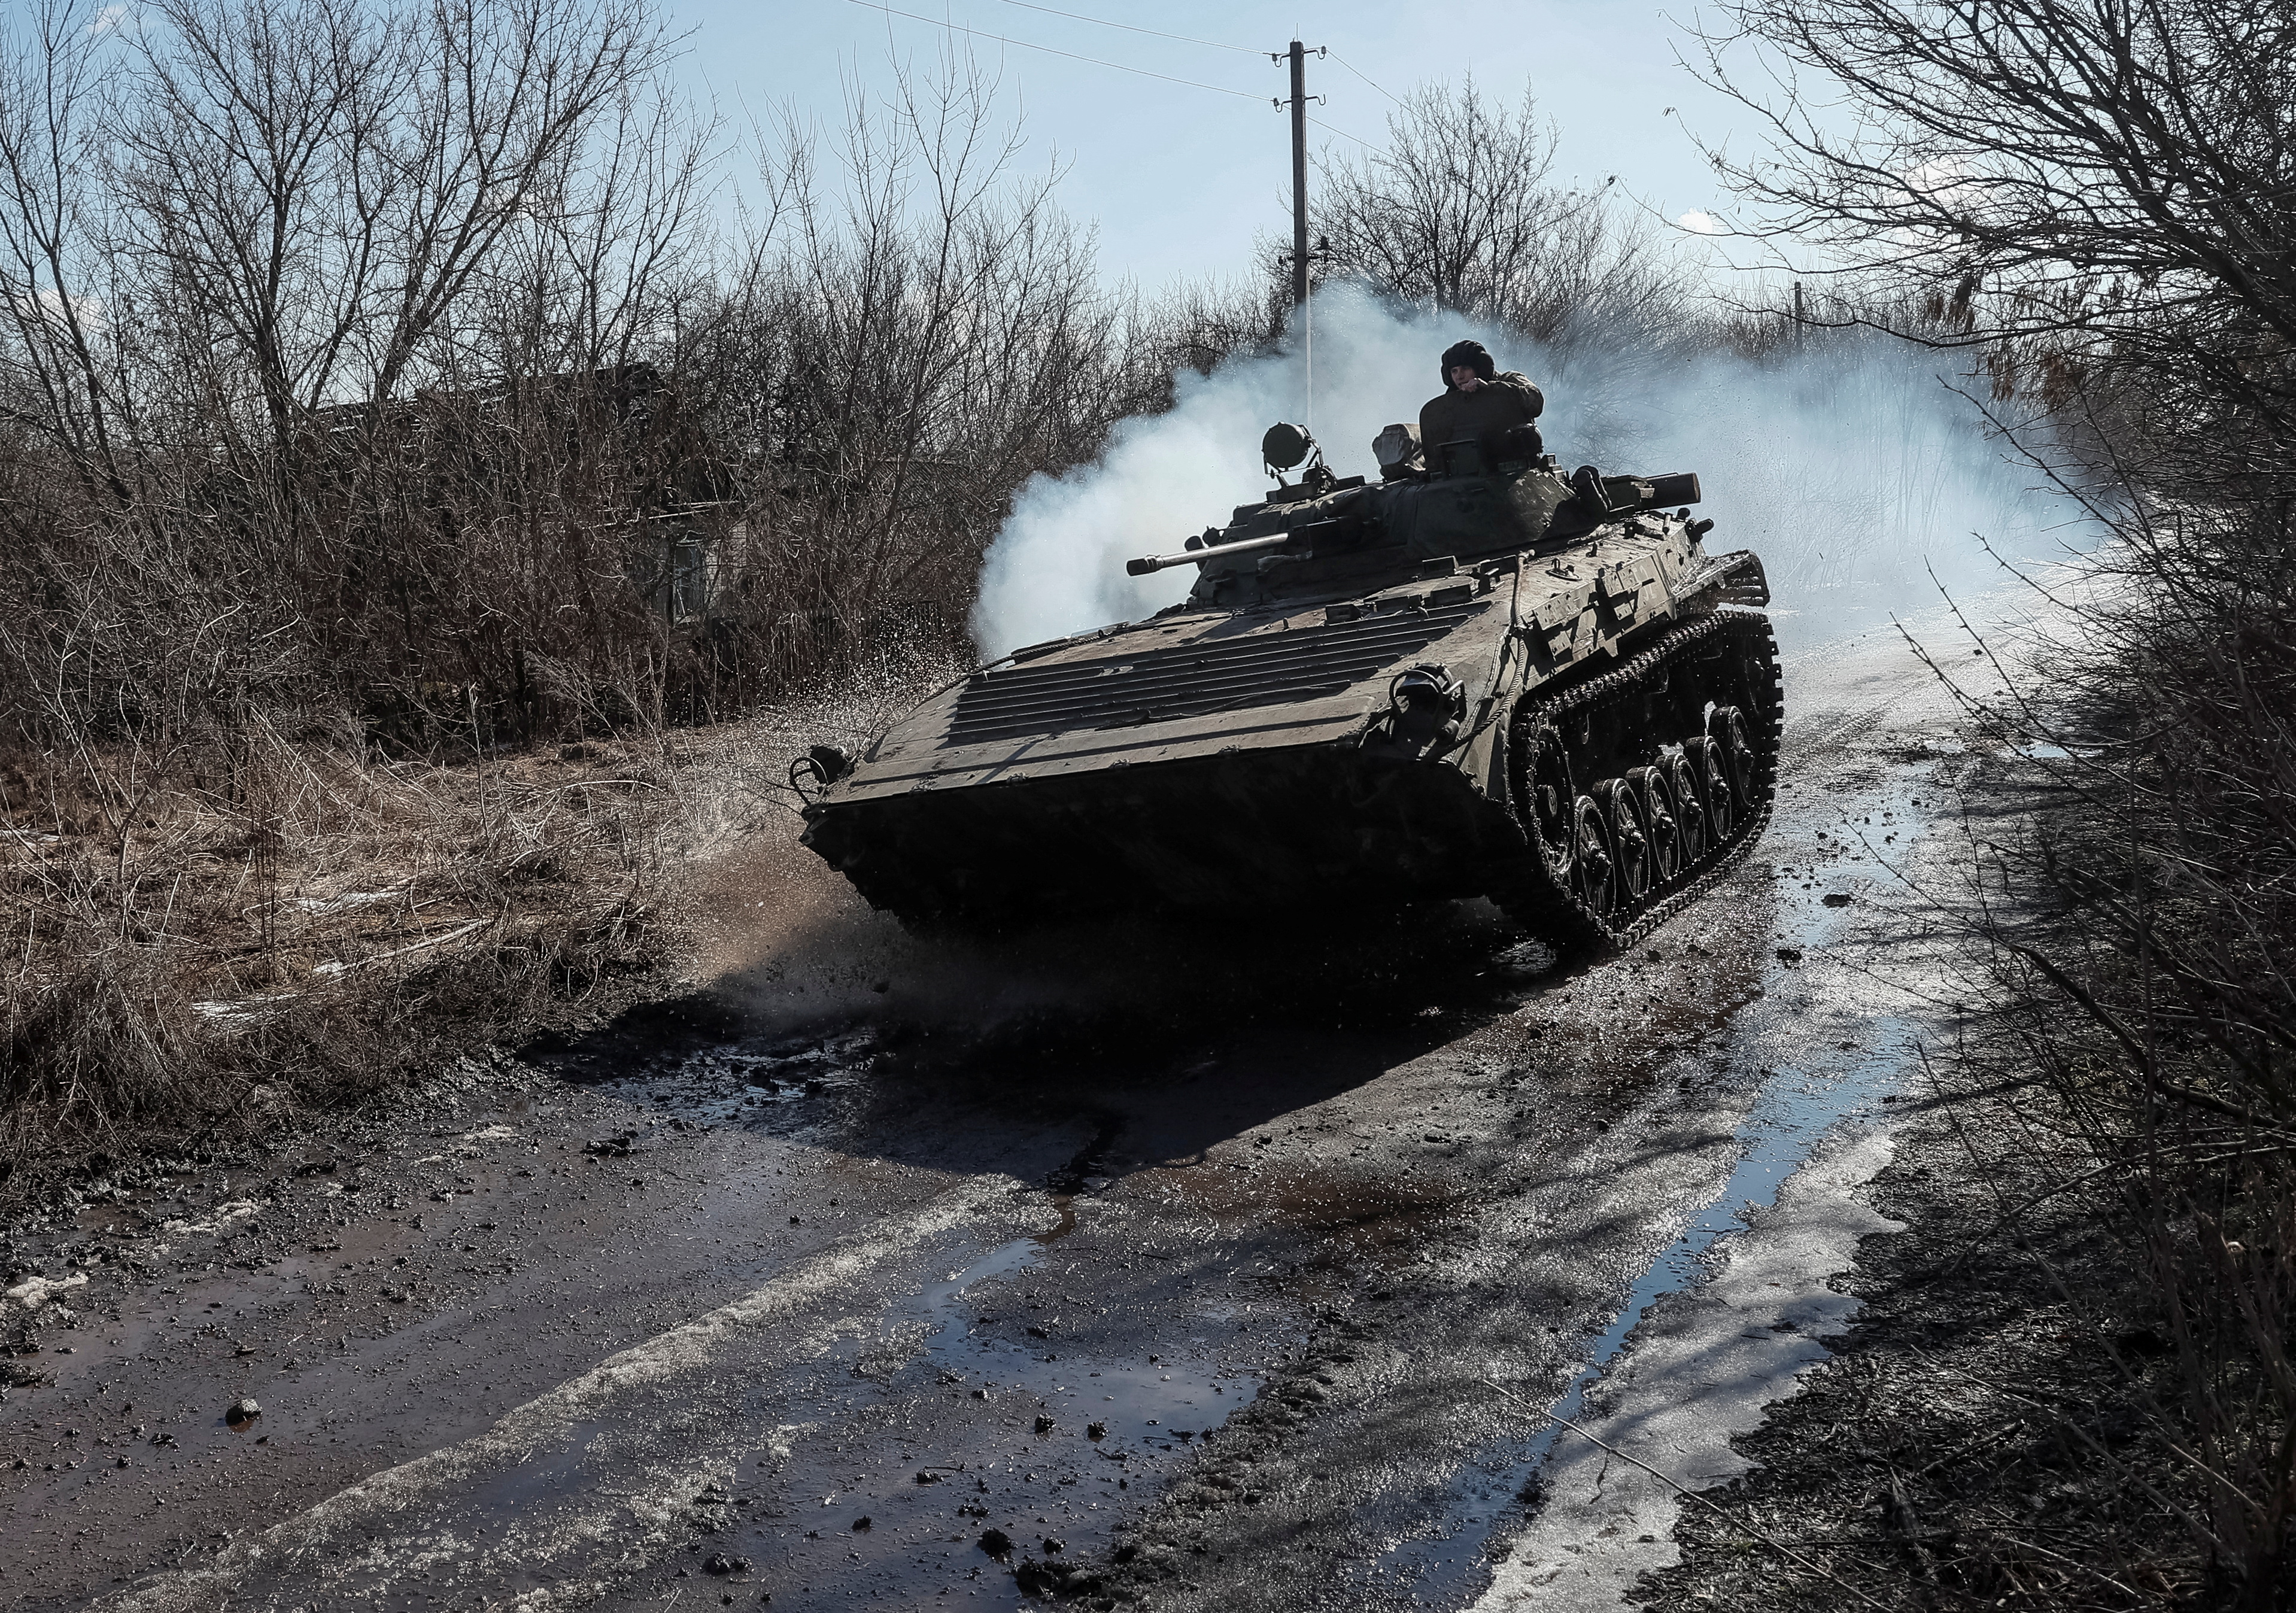 Ukrainian service members ride at a infantry fighting vehicle on the front line near the village of Zaitseve in the Donetsk region